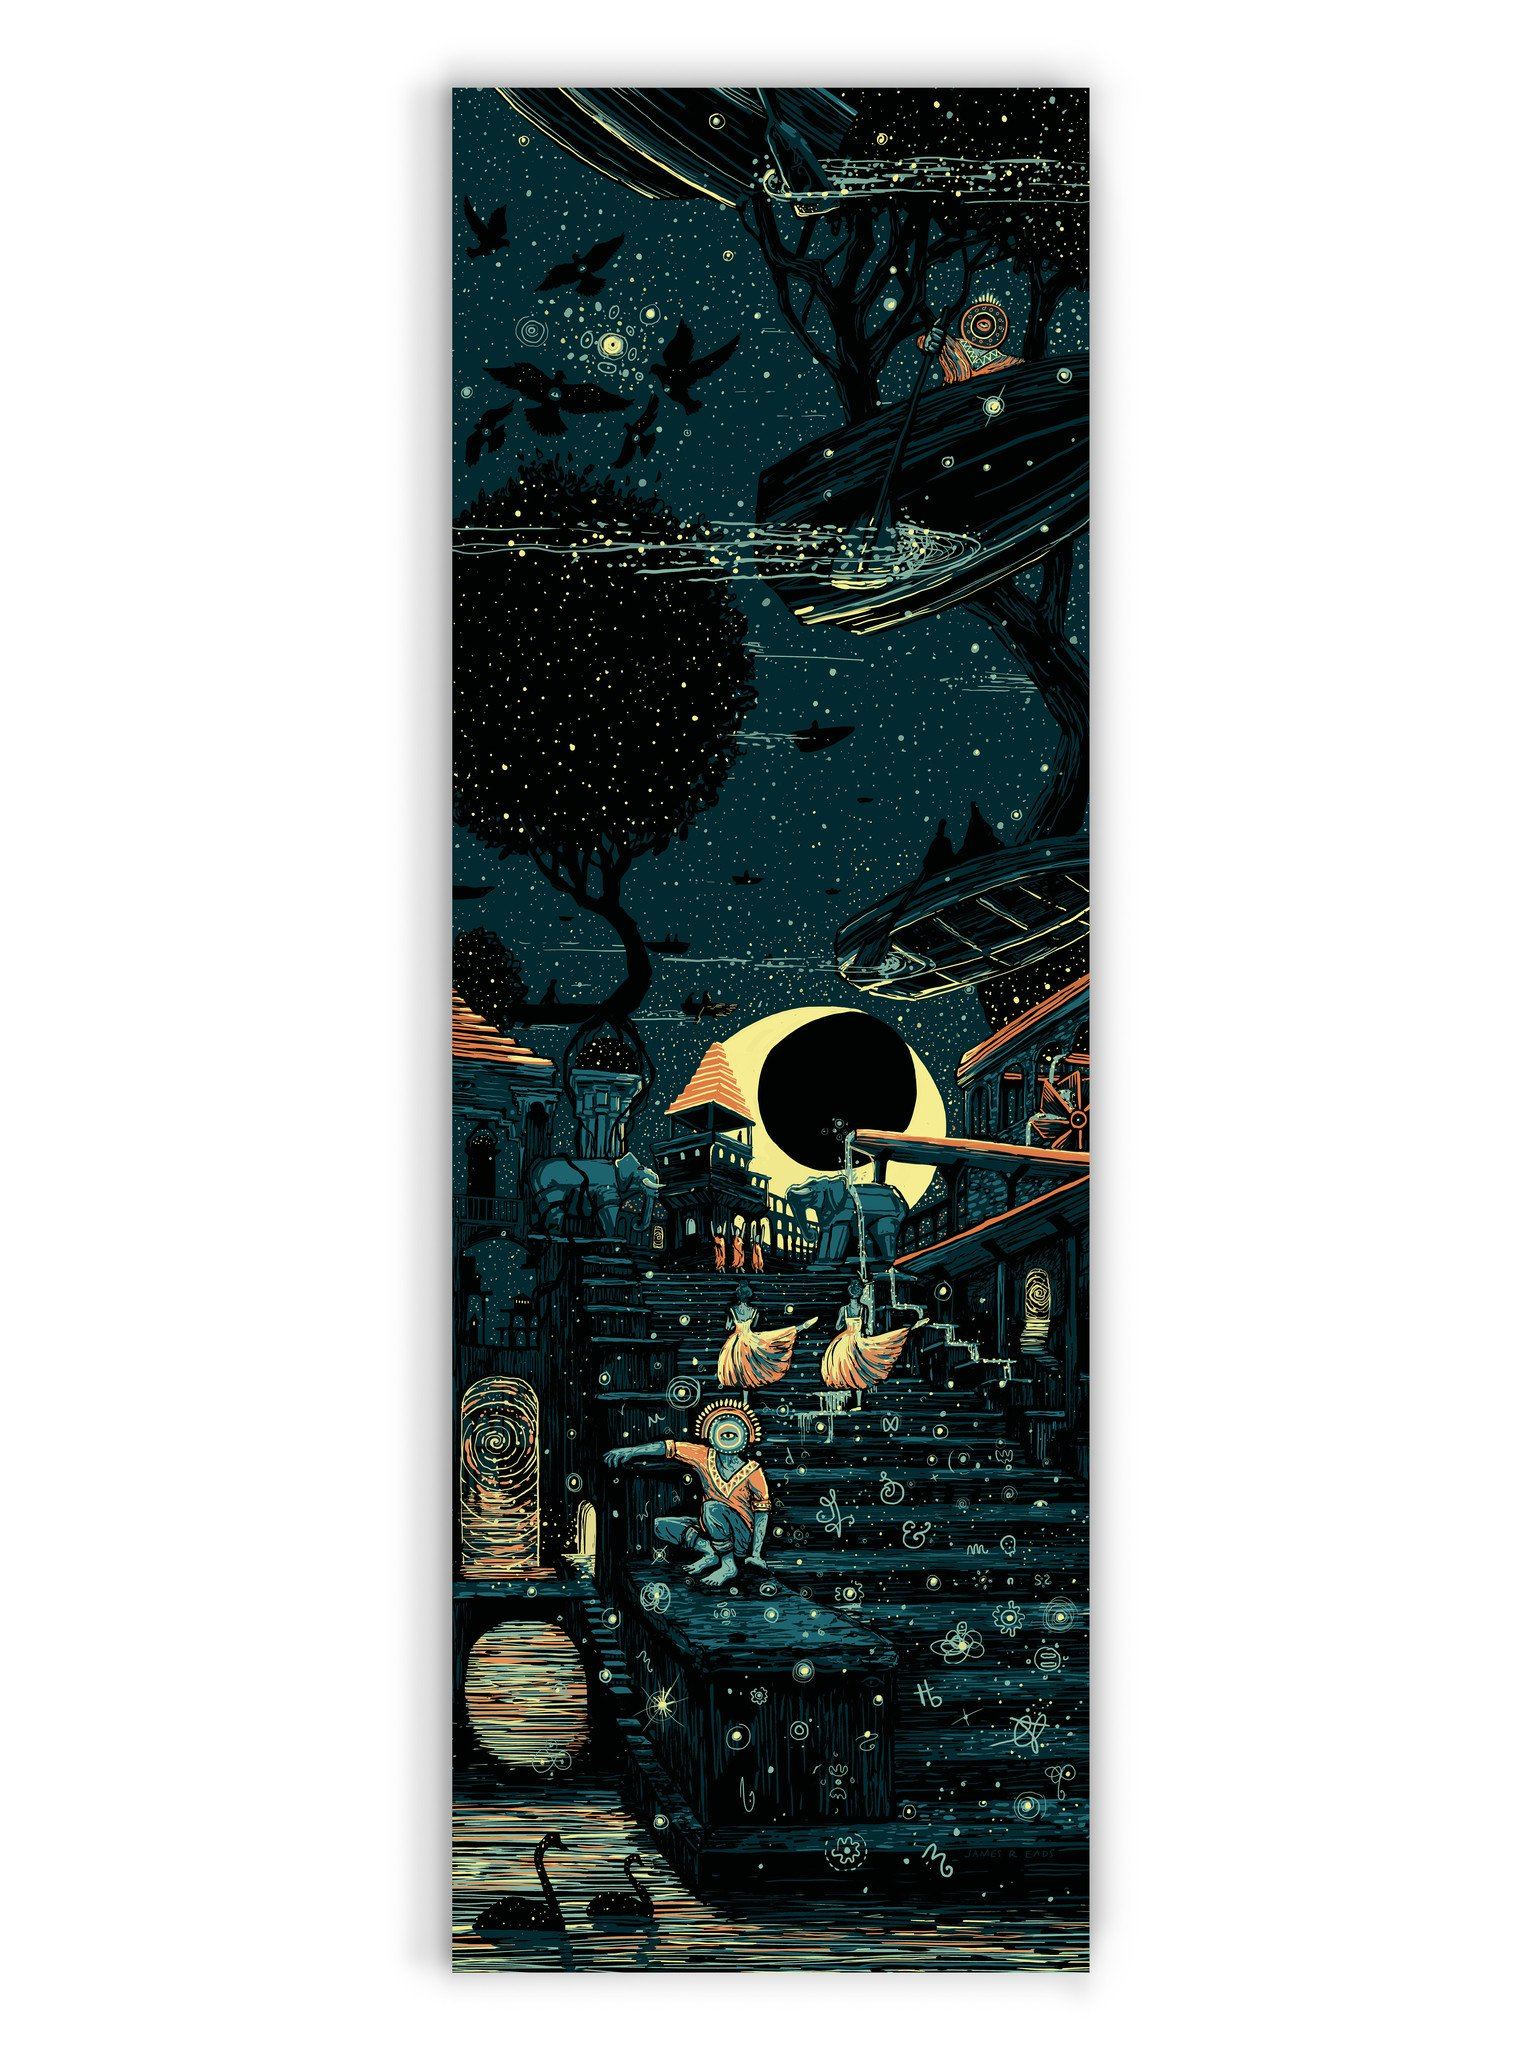 The Language of Time (Limited Edition of 60) Print James R. Eads